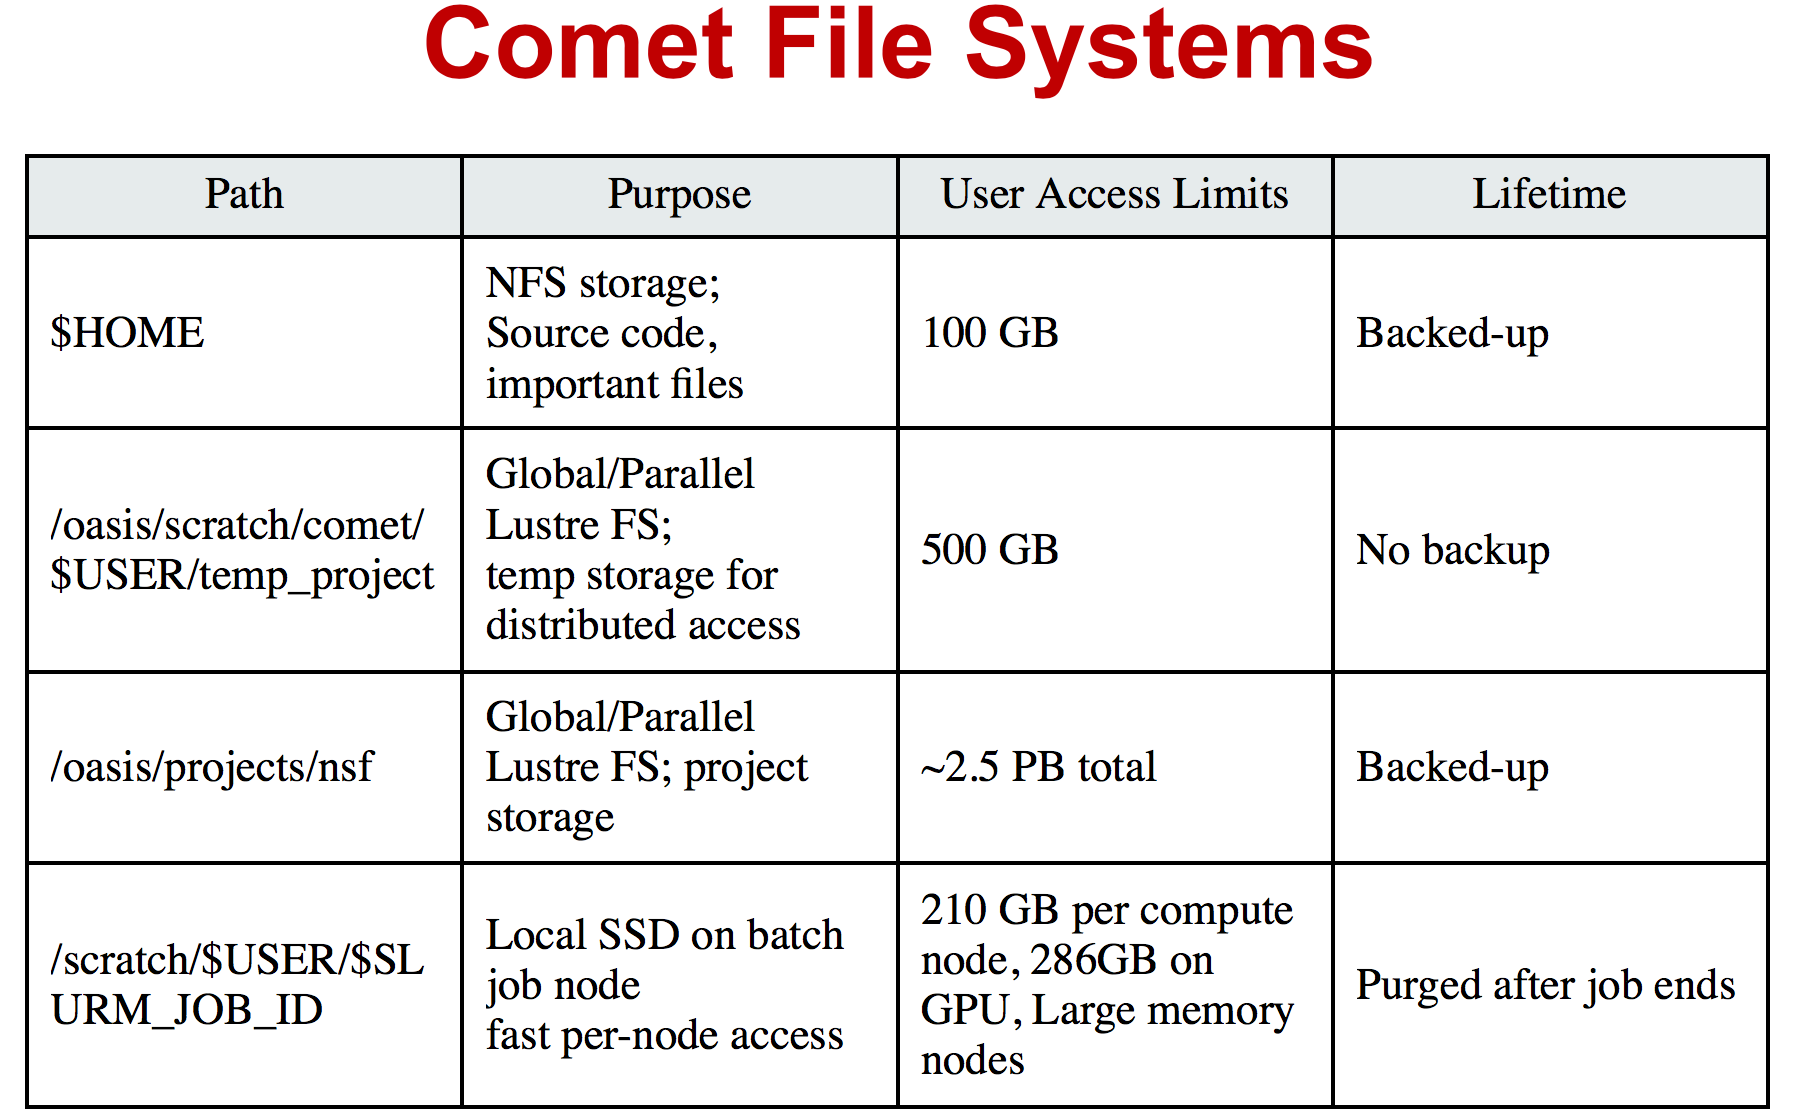 Comet File Systems